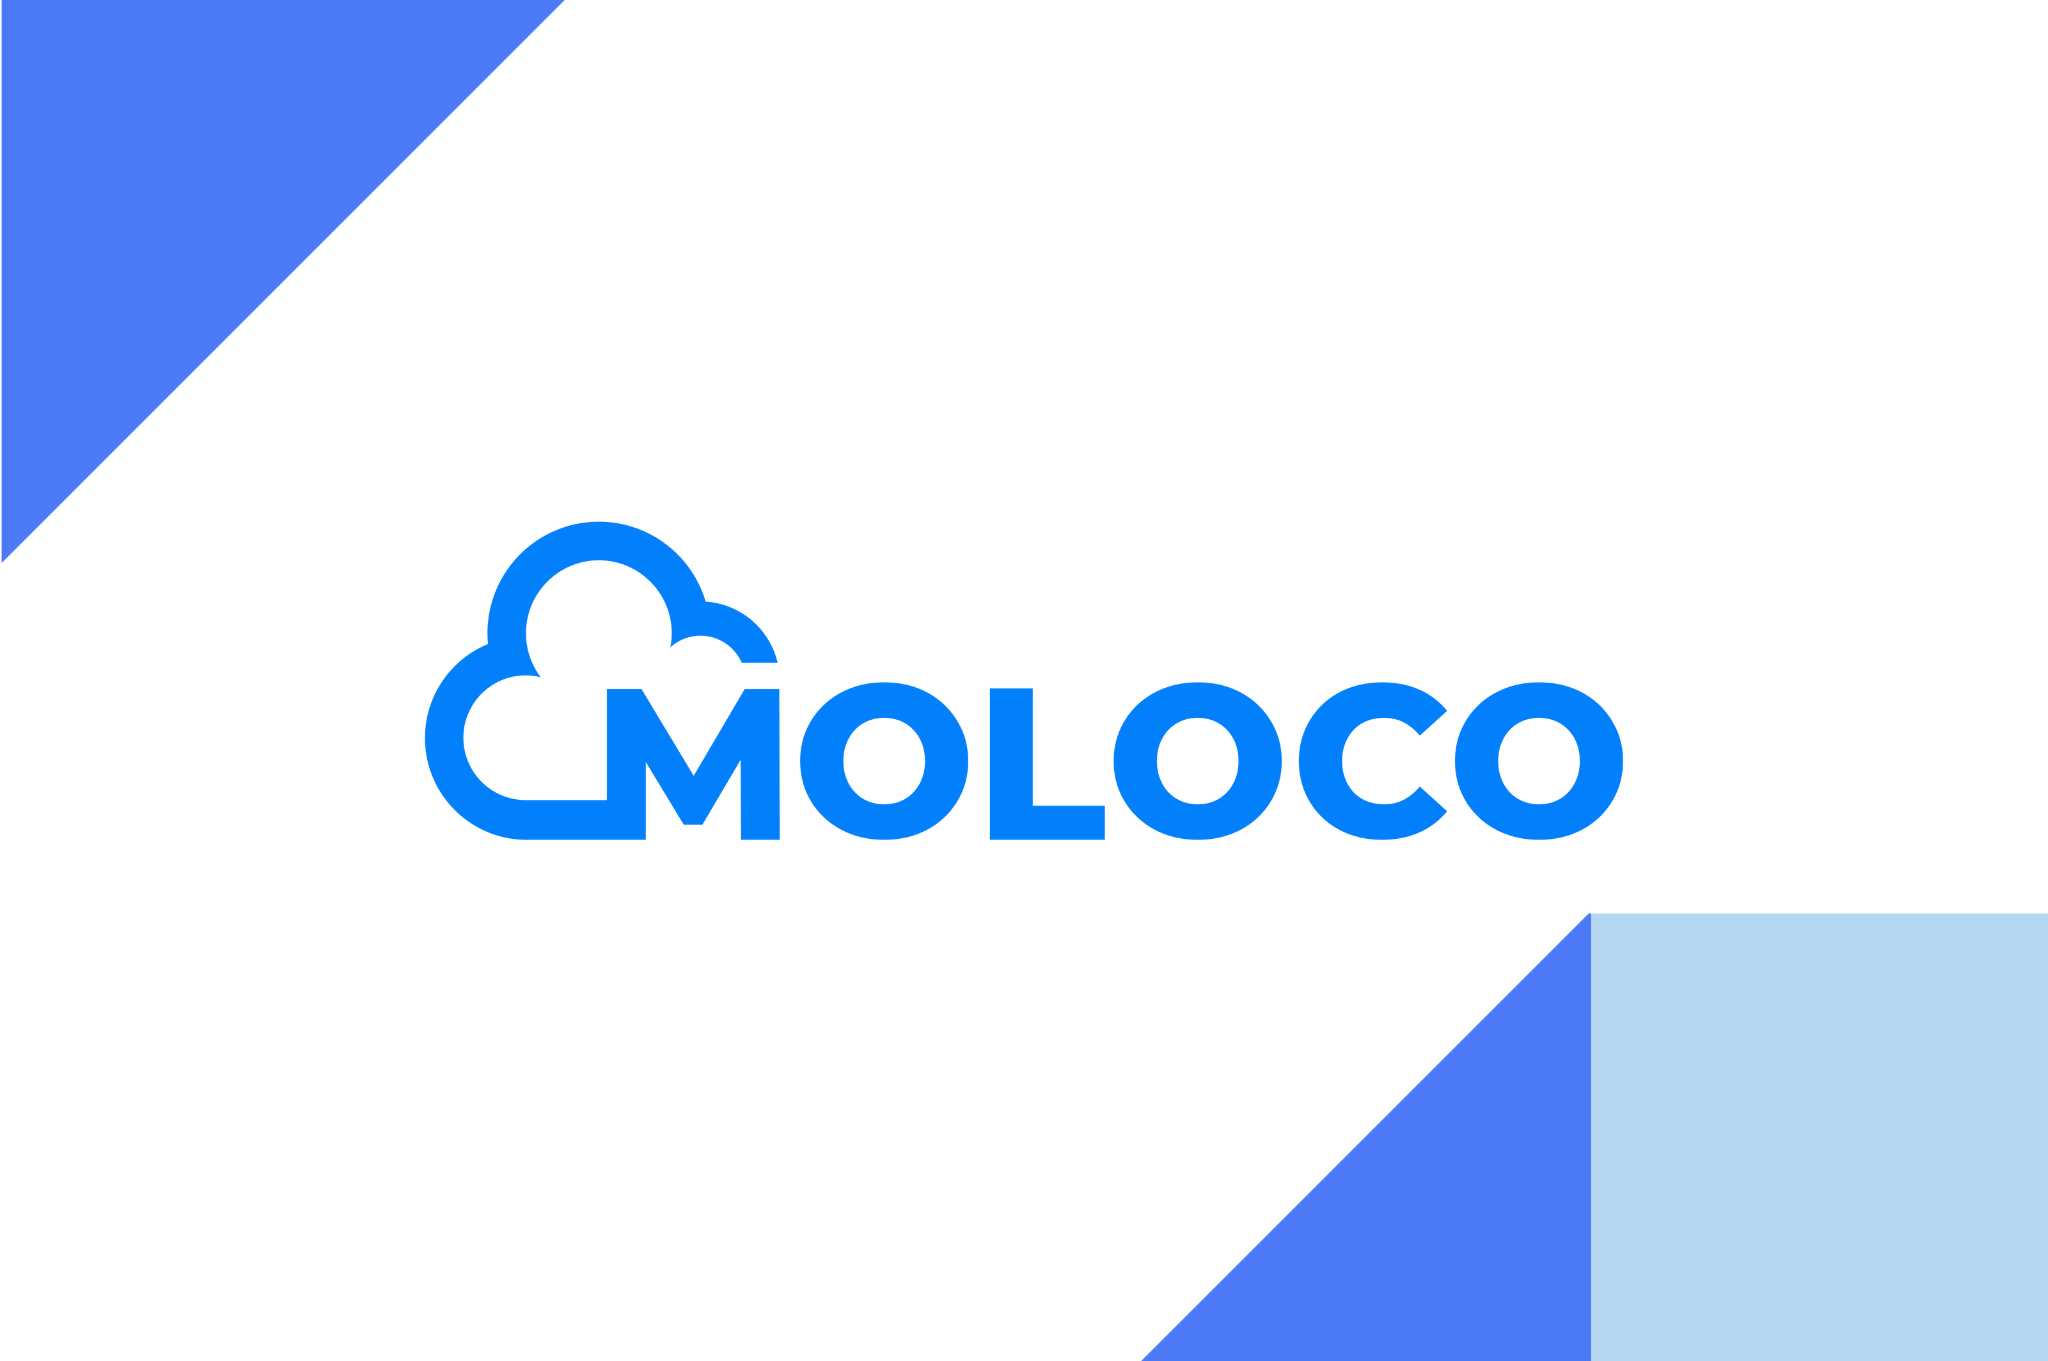 Moloco’s advanced ad serving technology scaled across more than 32M peak concurrent users with billions of impressions served during Indian Premier League (Tata IPL) 2023 